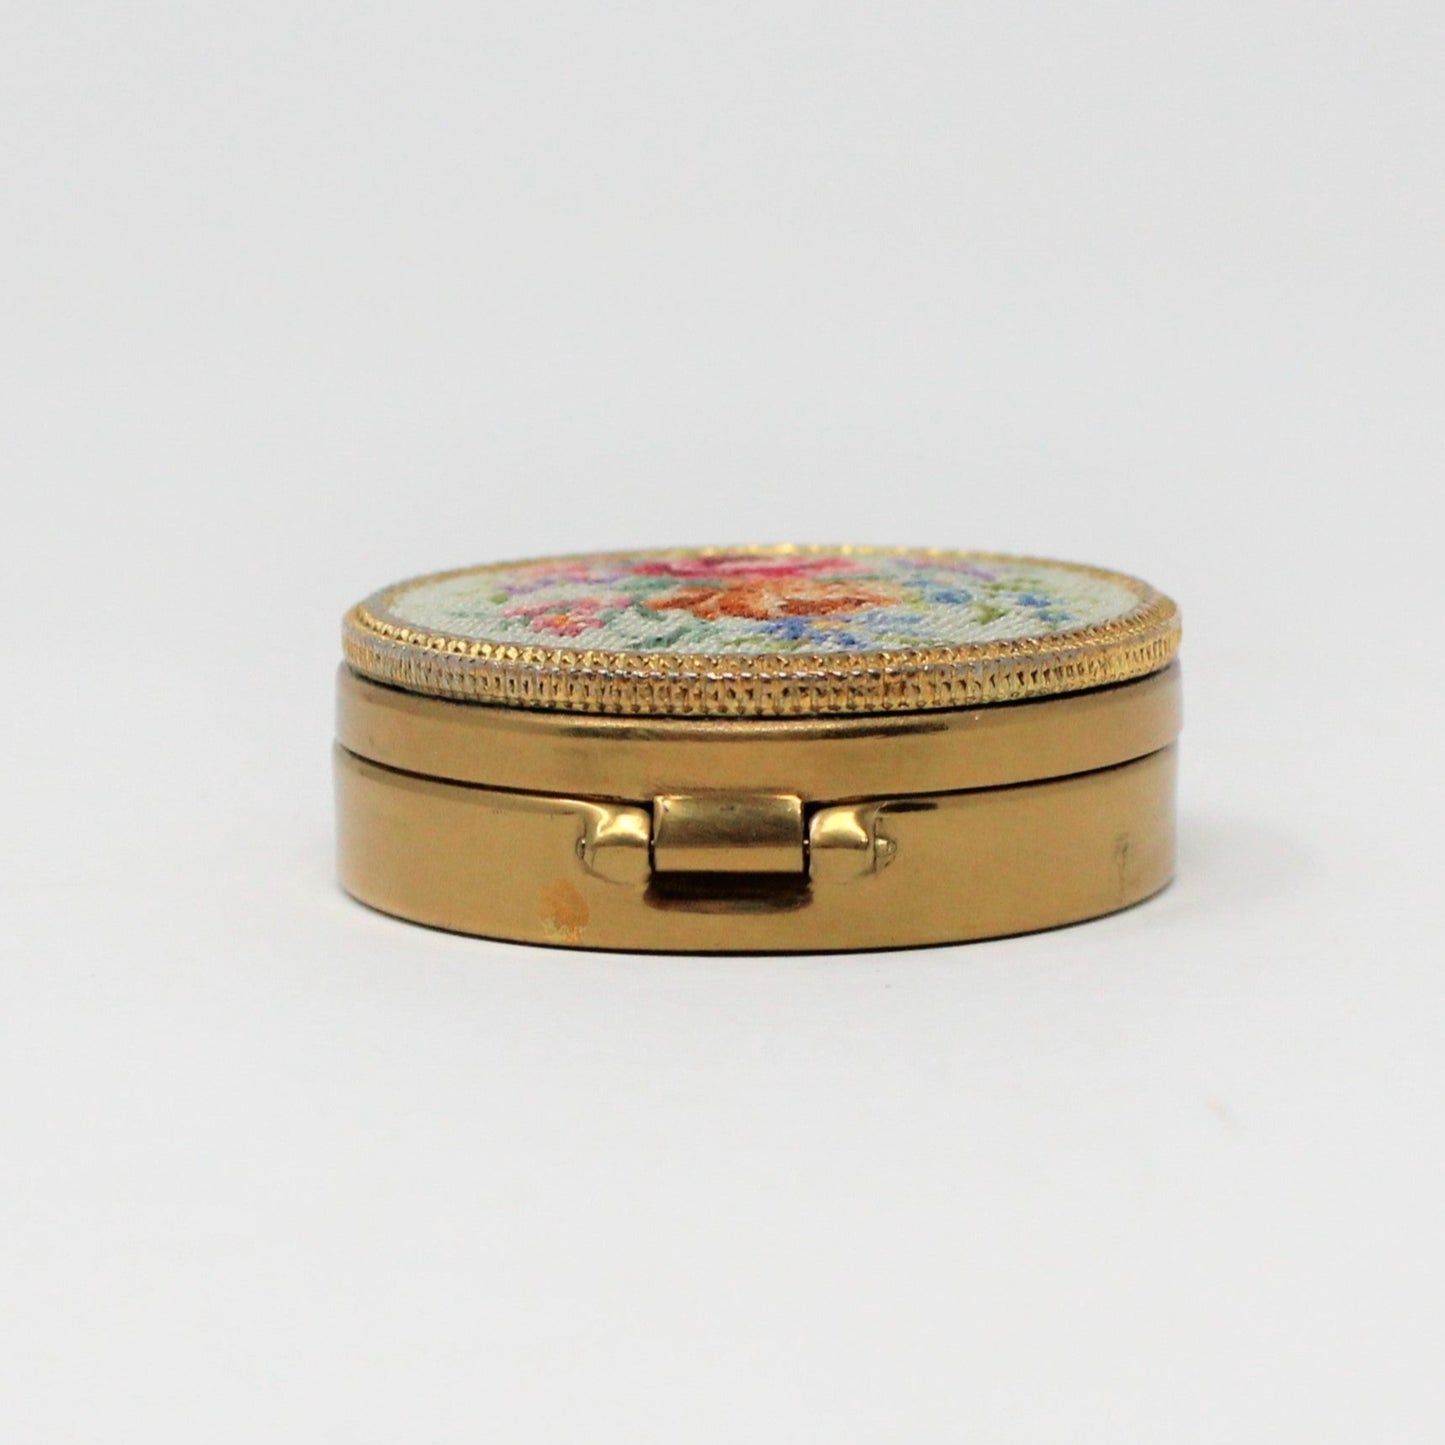 Pill Box, Petit Point Needlepoint Roses, Brass, Hinged, Vintage